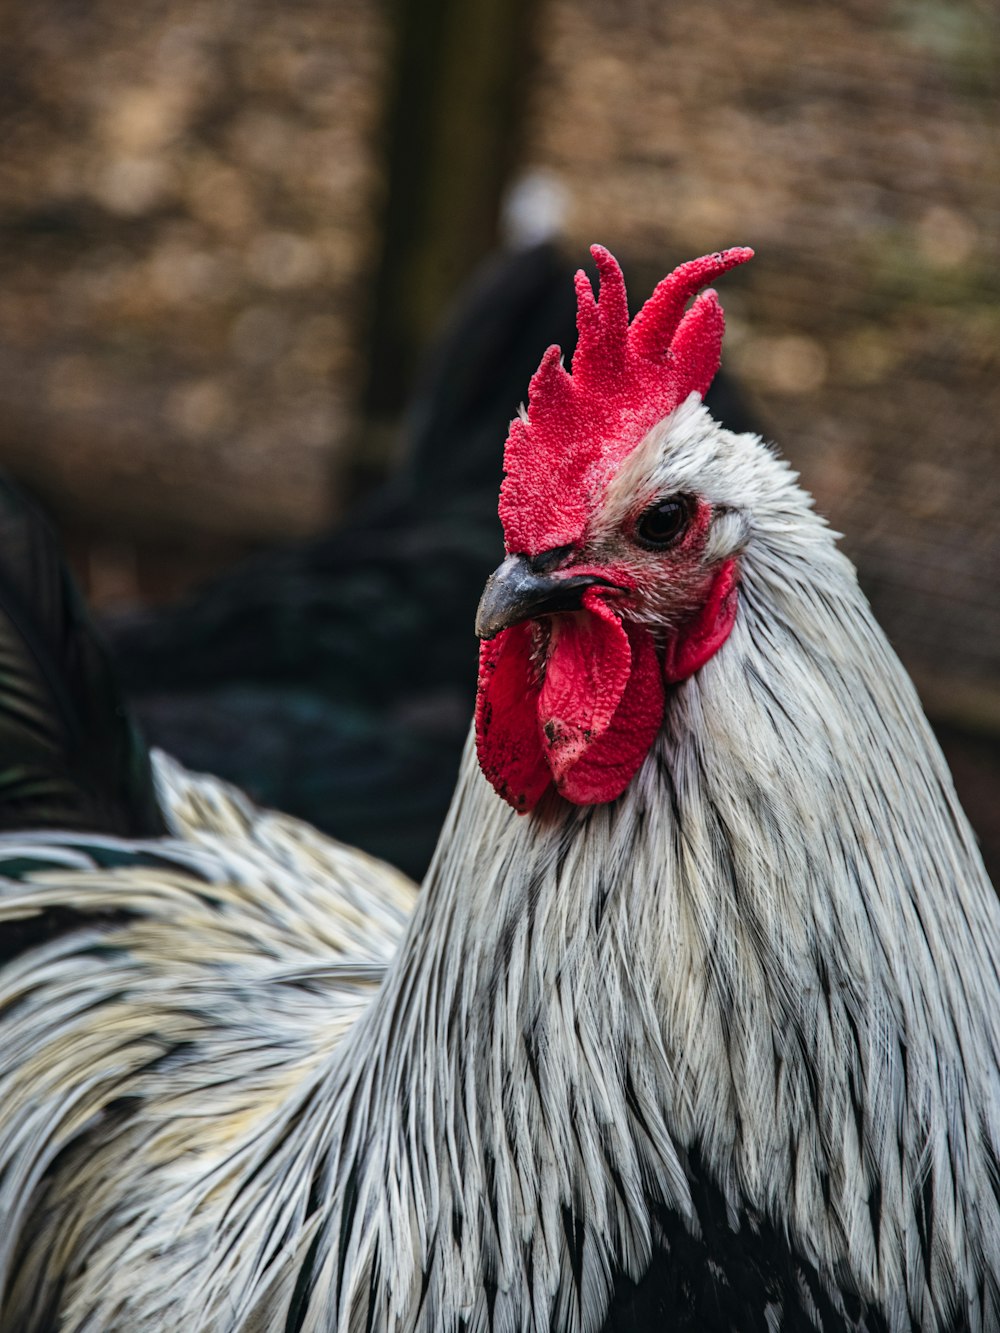 a close up of a rooster with a red comb